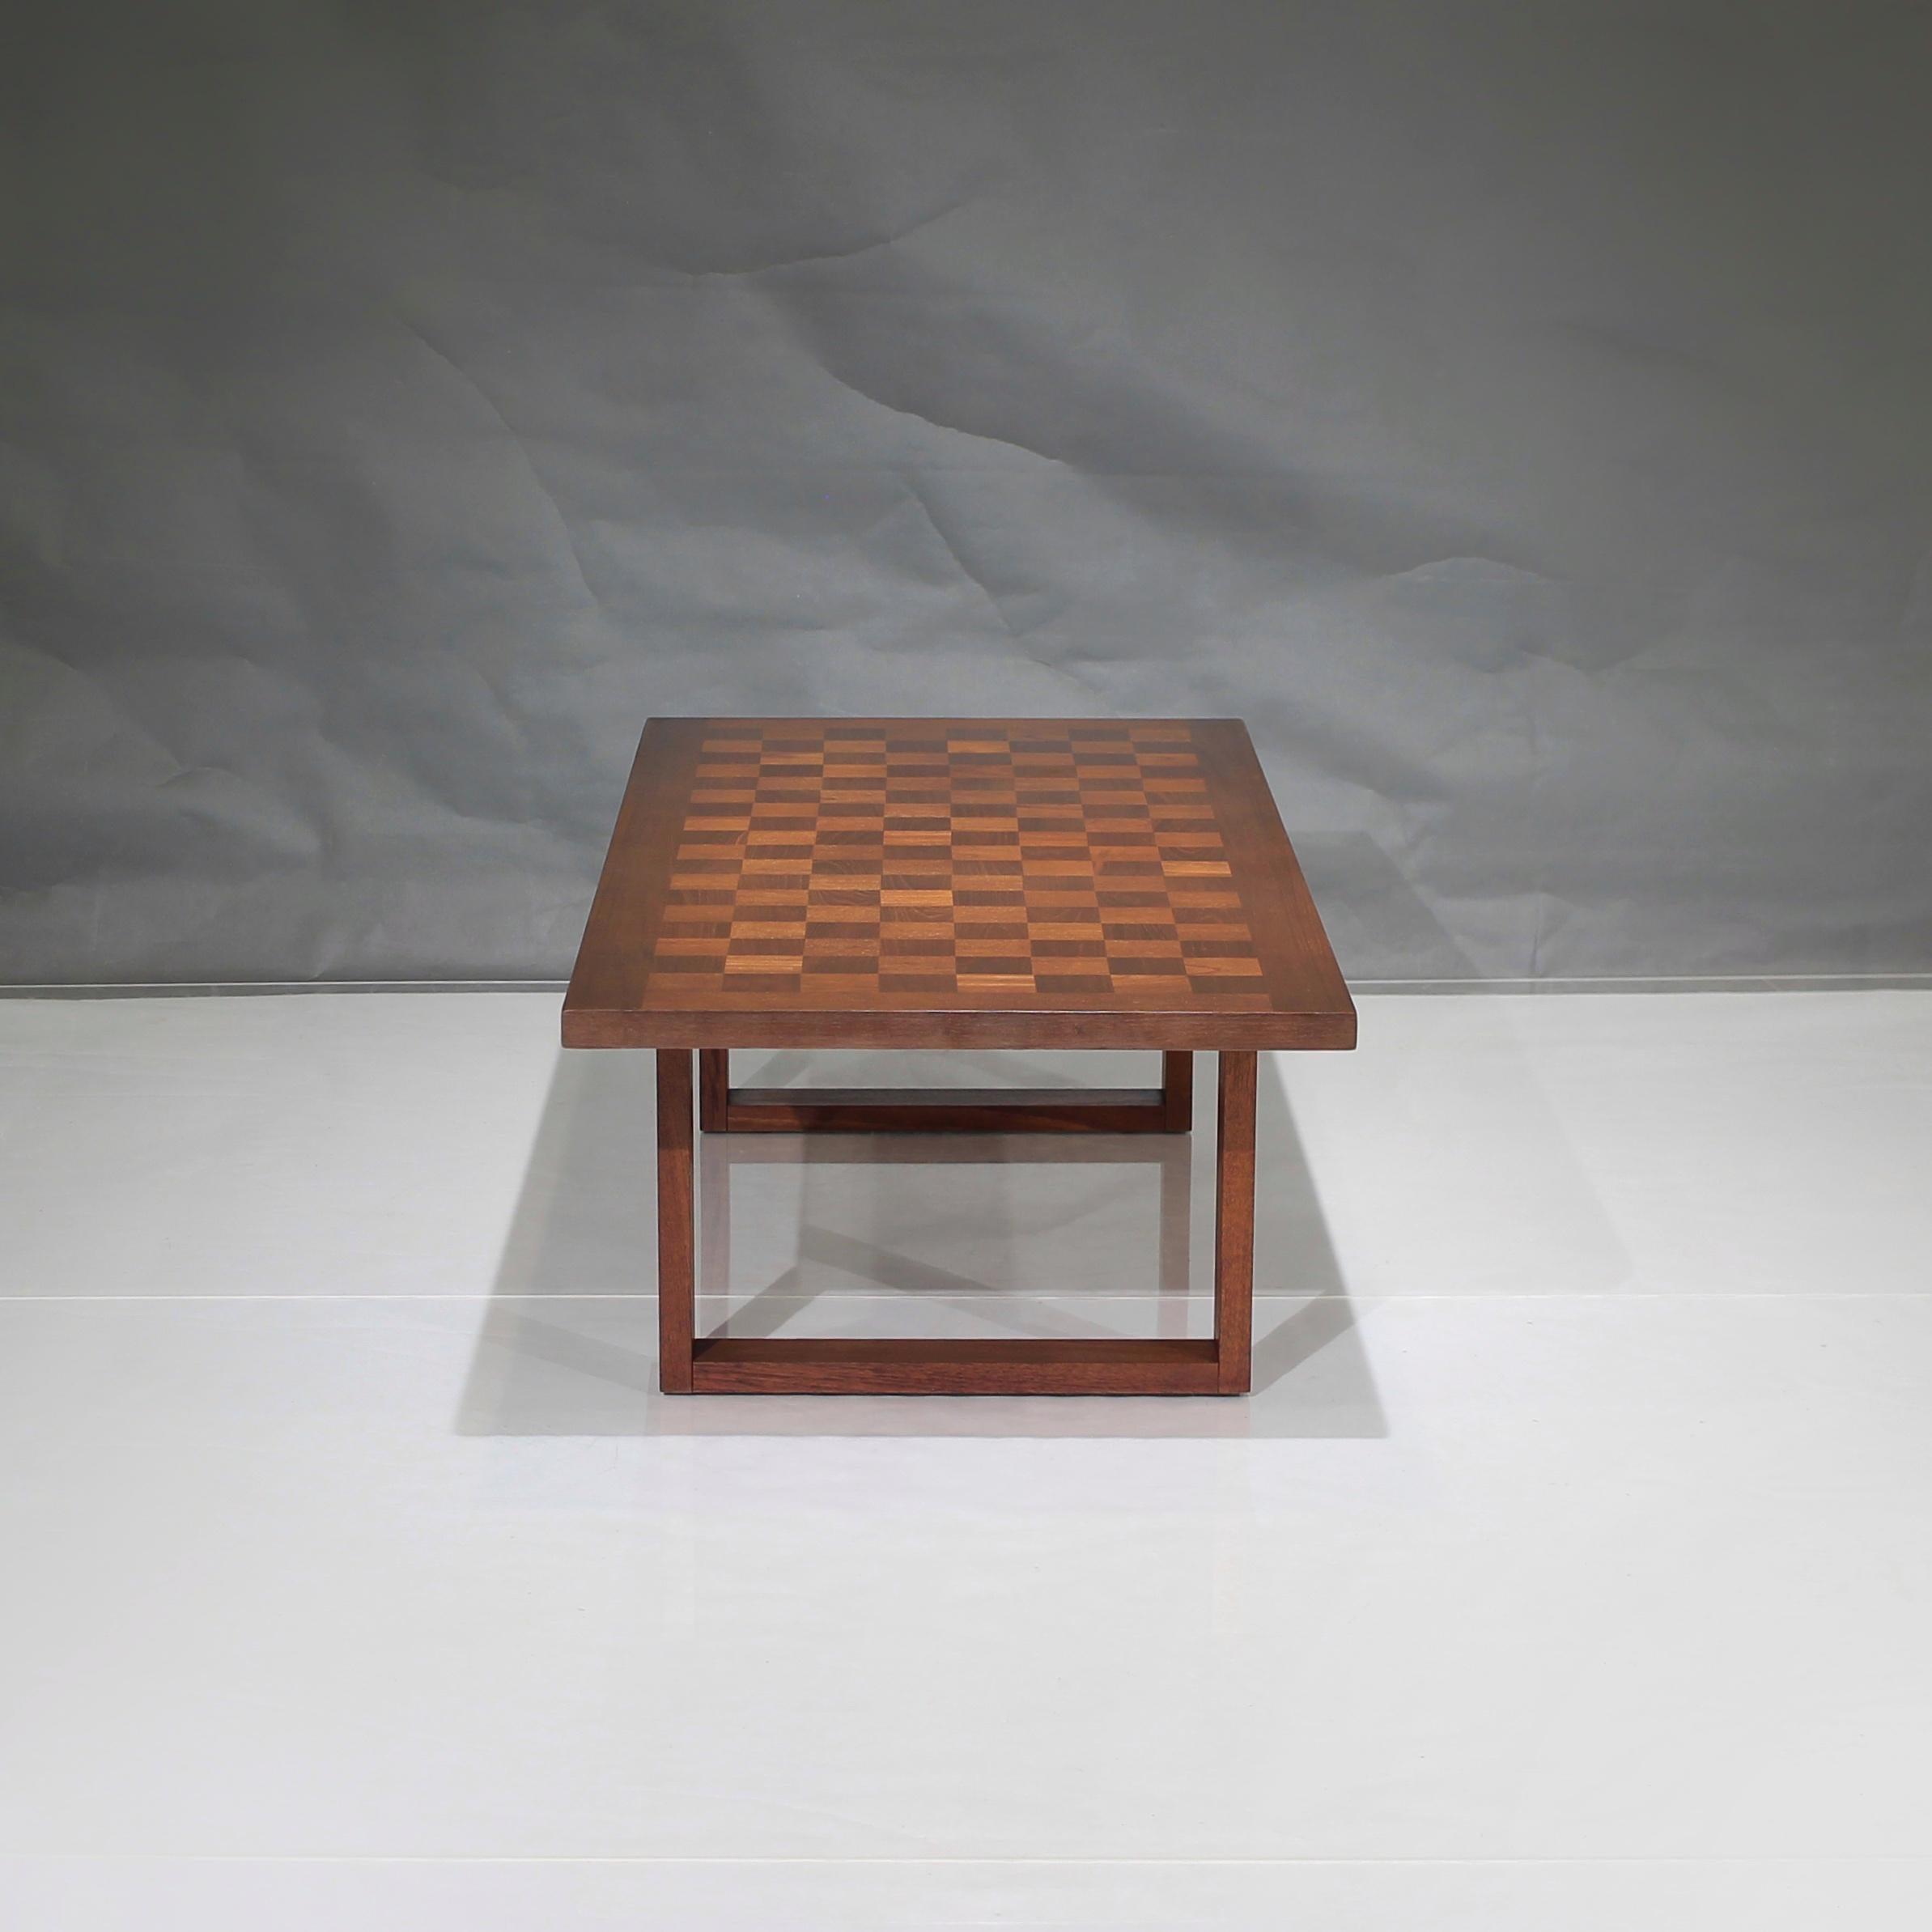 Presenting this mid-century Danish teak coffee table by Poul Cadovius for Cado.

Elevated in a beautiful manner and displaying wonderful Checkerboard Teak inlay with varying grain direction.

A wonderful piece that brings in all of the warmth